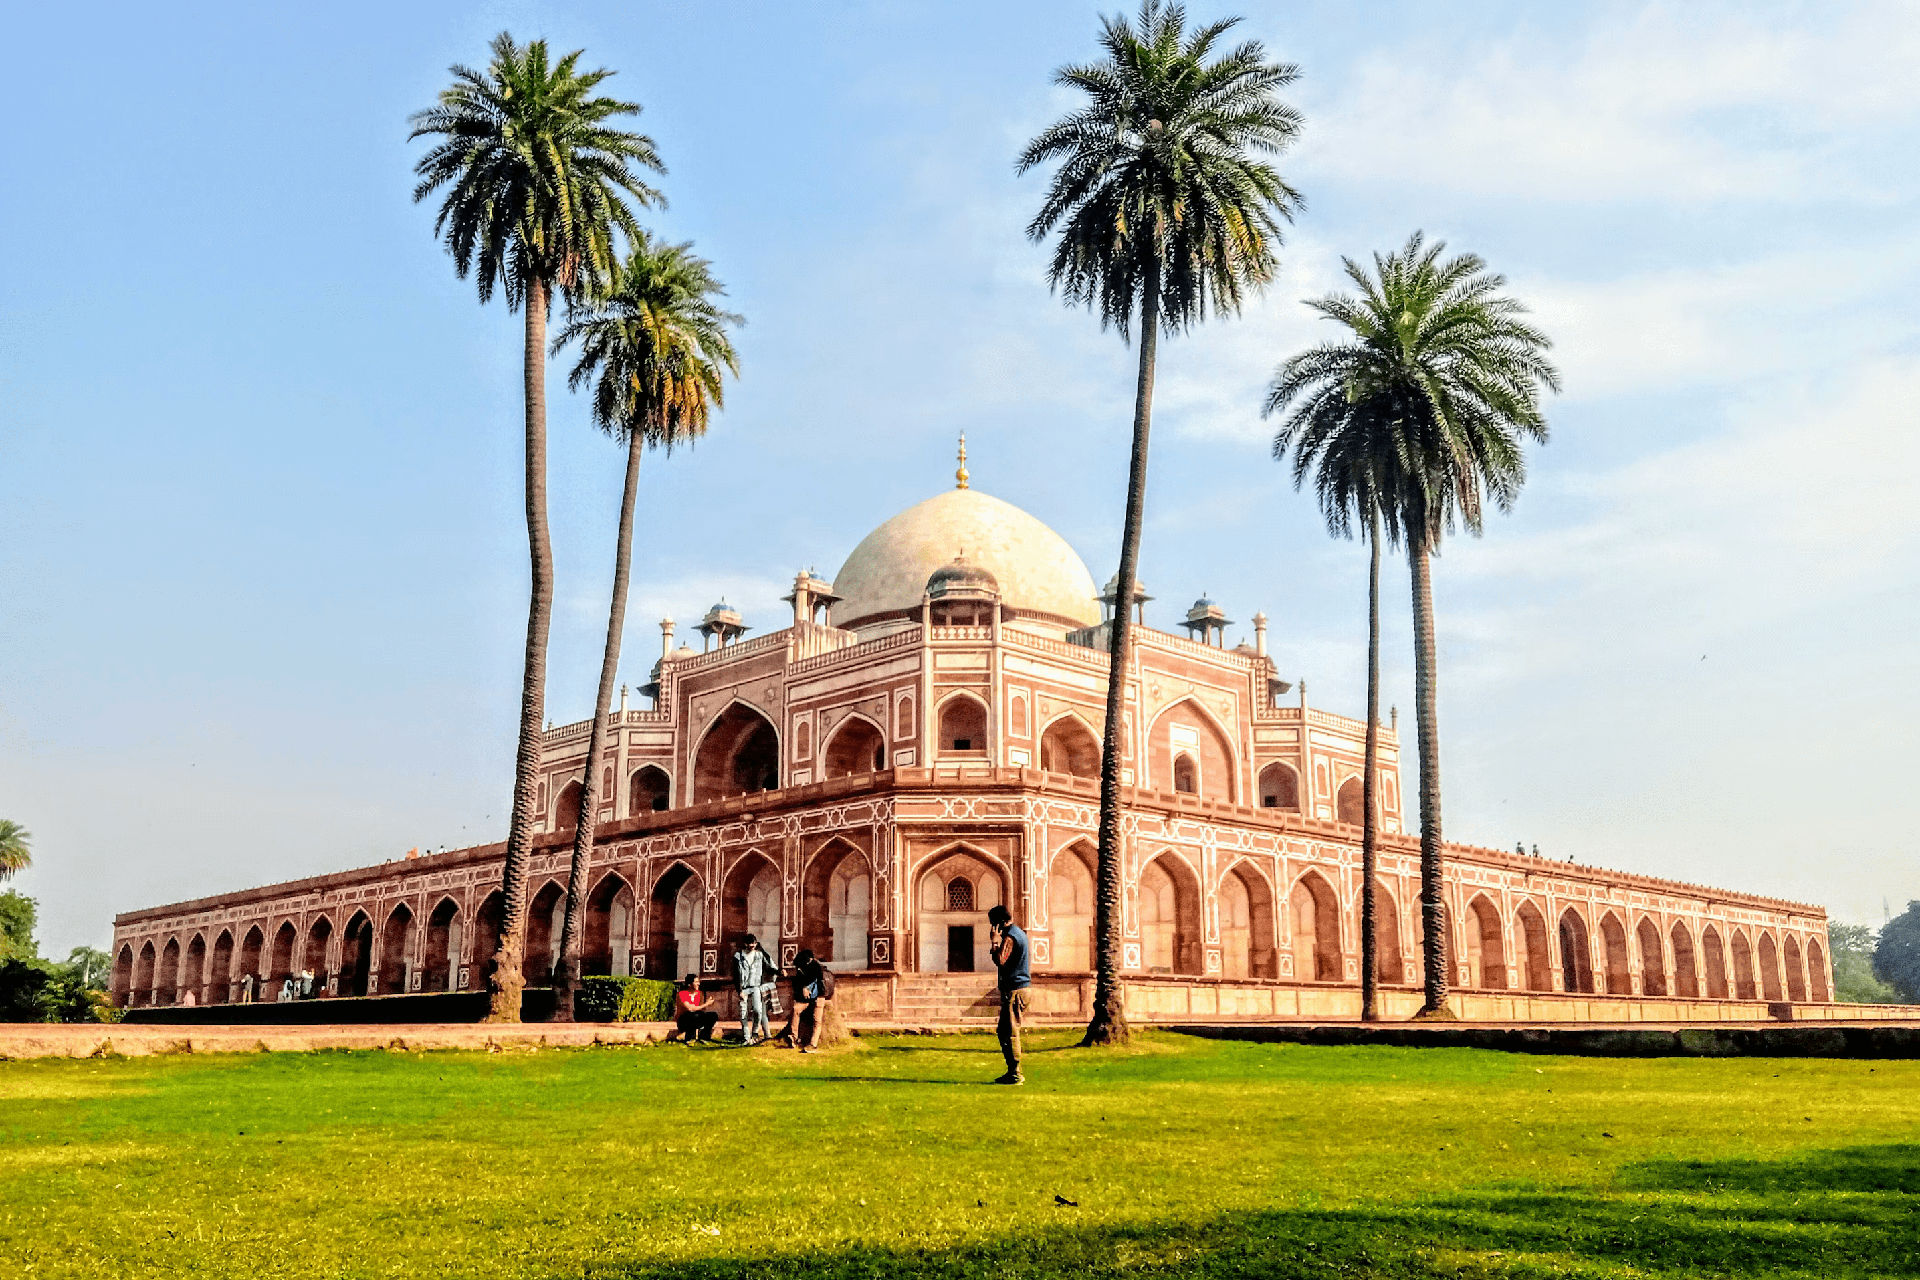 the Tomb of Humayun in northern India